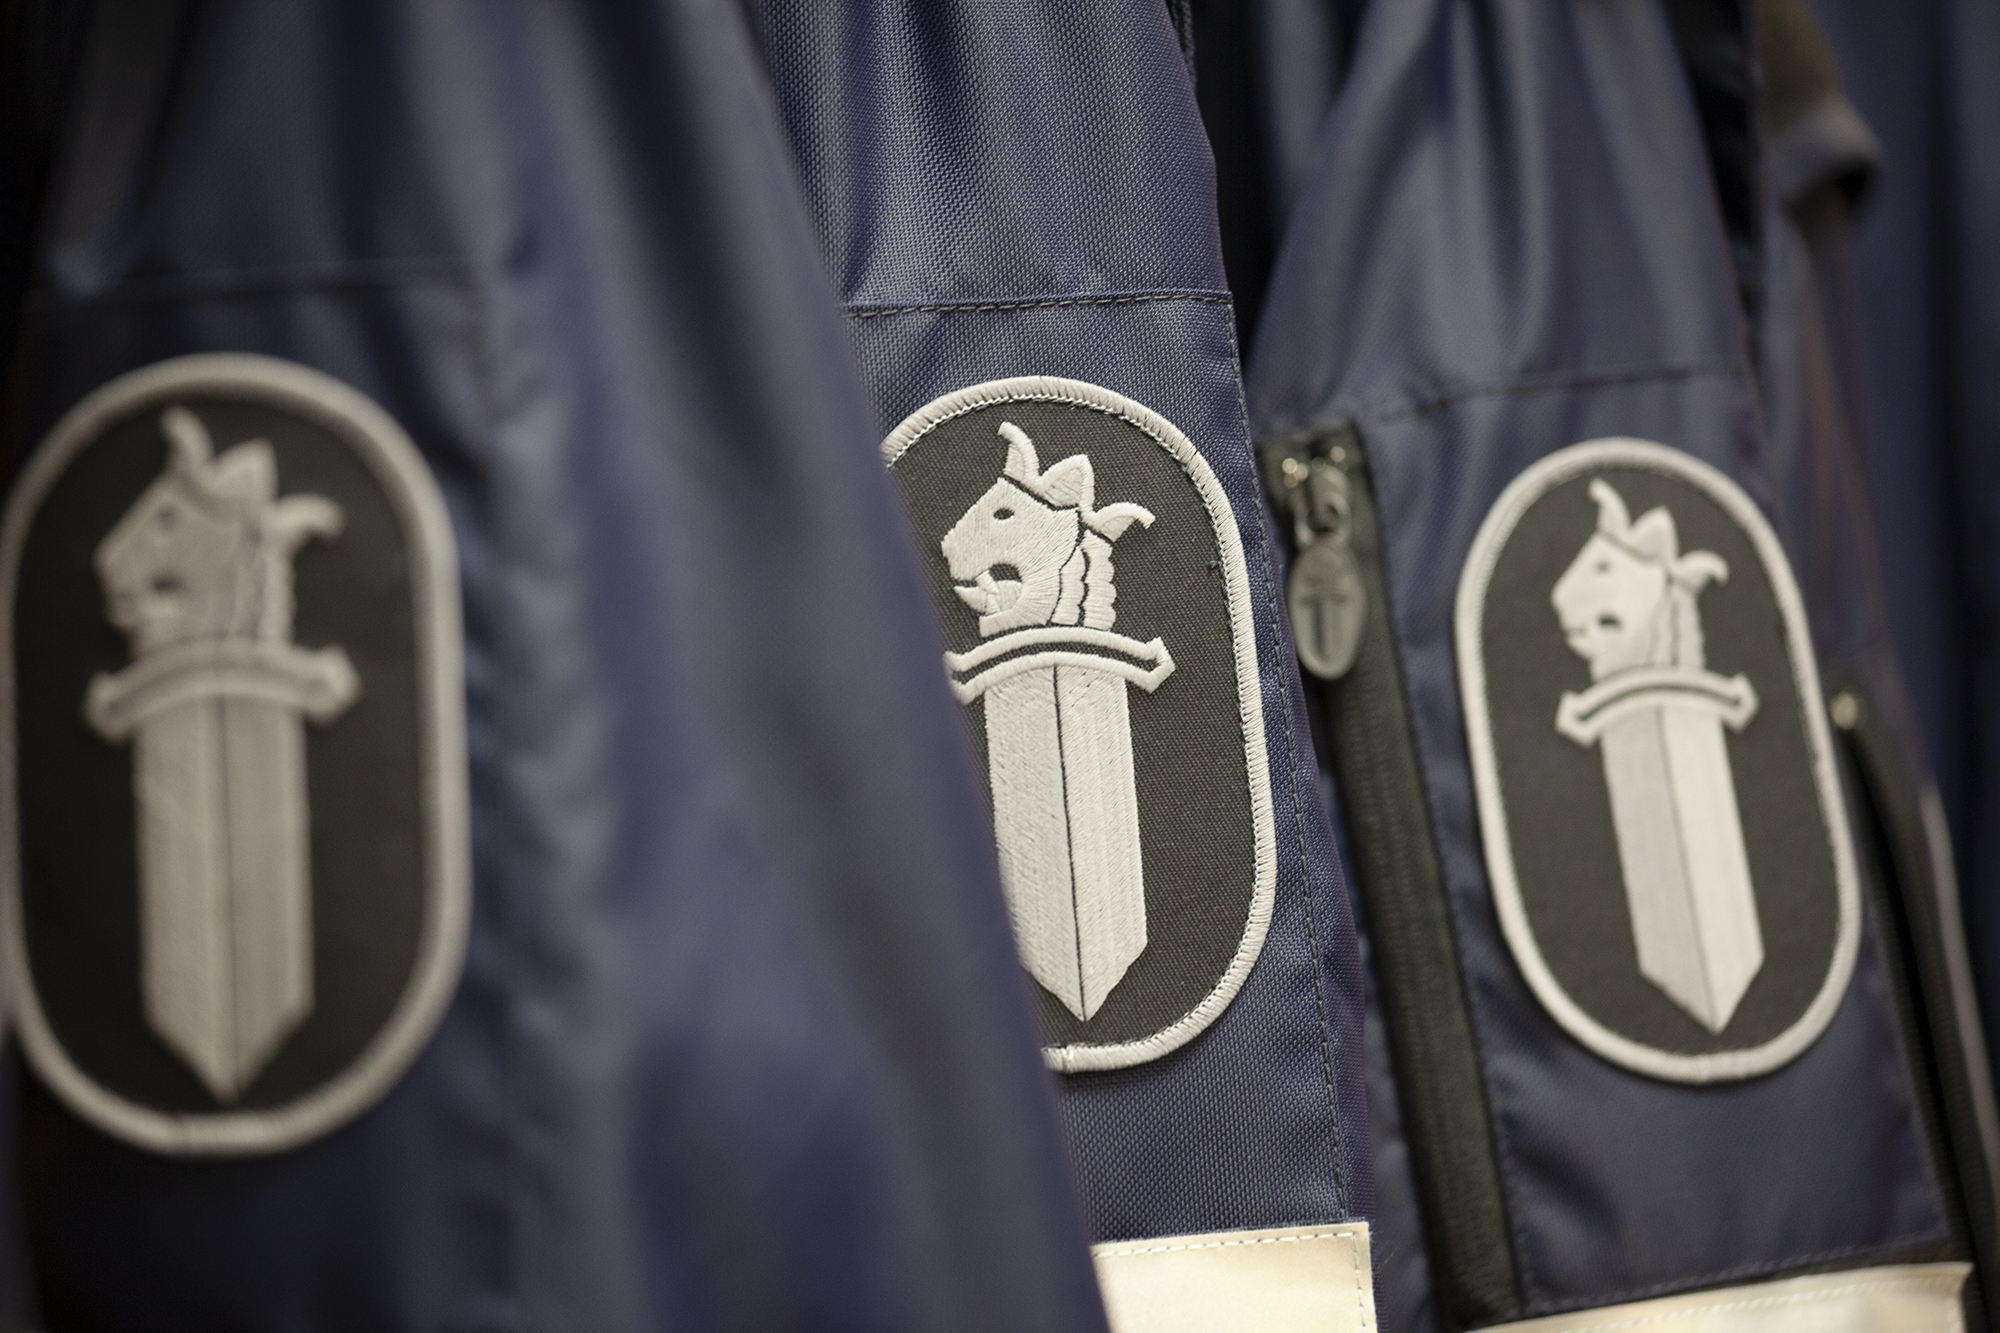 Sleeve badges on police overalls showing the emblem of the Finnish police.